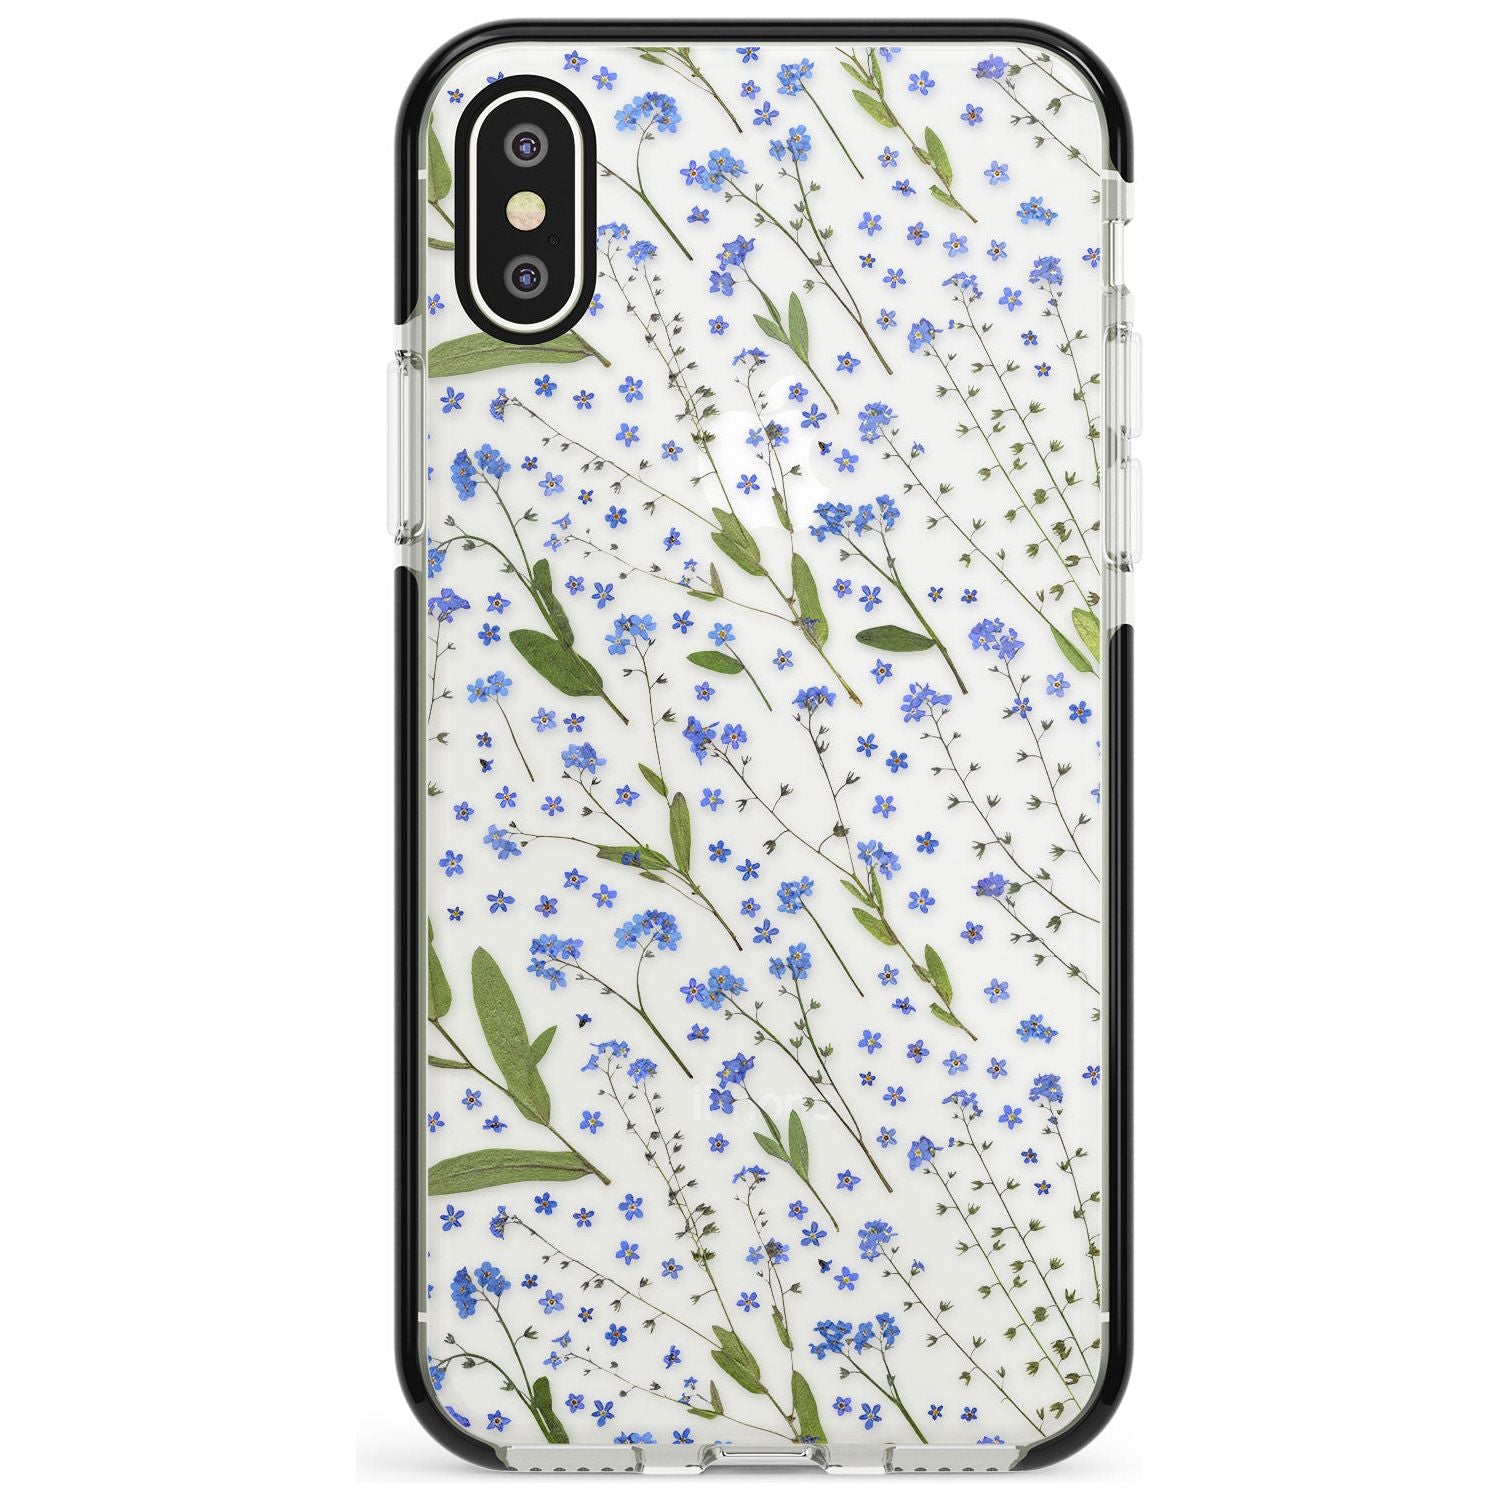 Blue Wild Flower Design Black Impact Phone Case for iPhone X XS Max XR